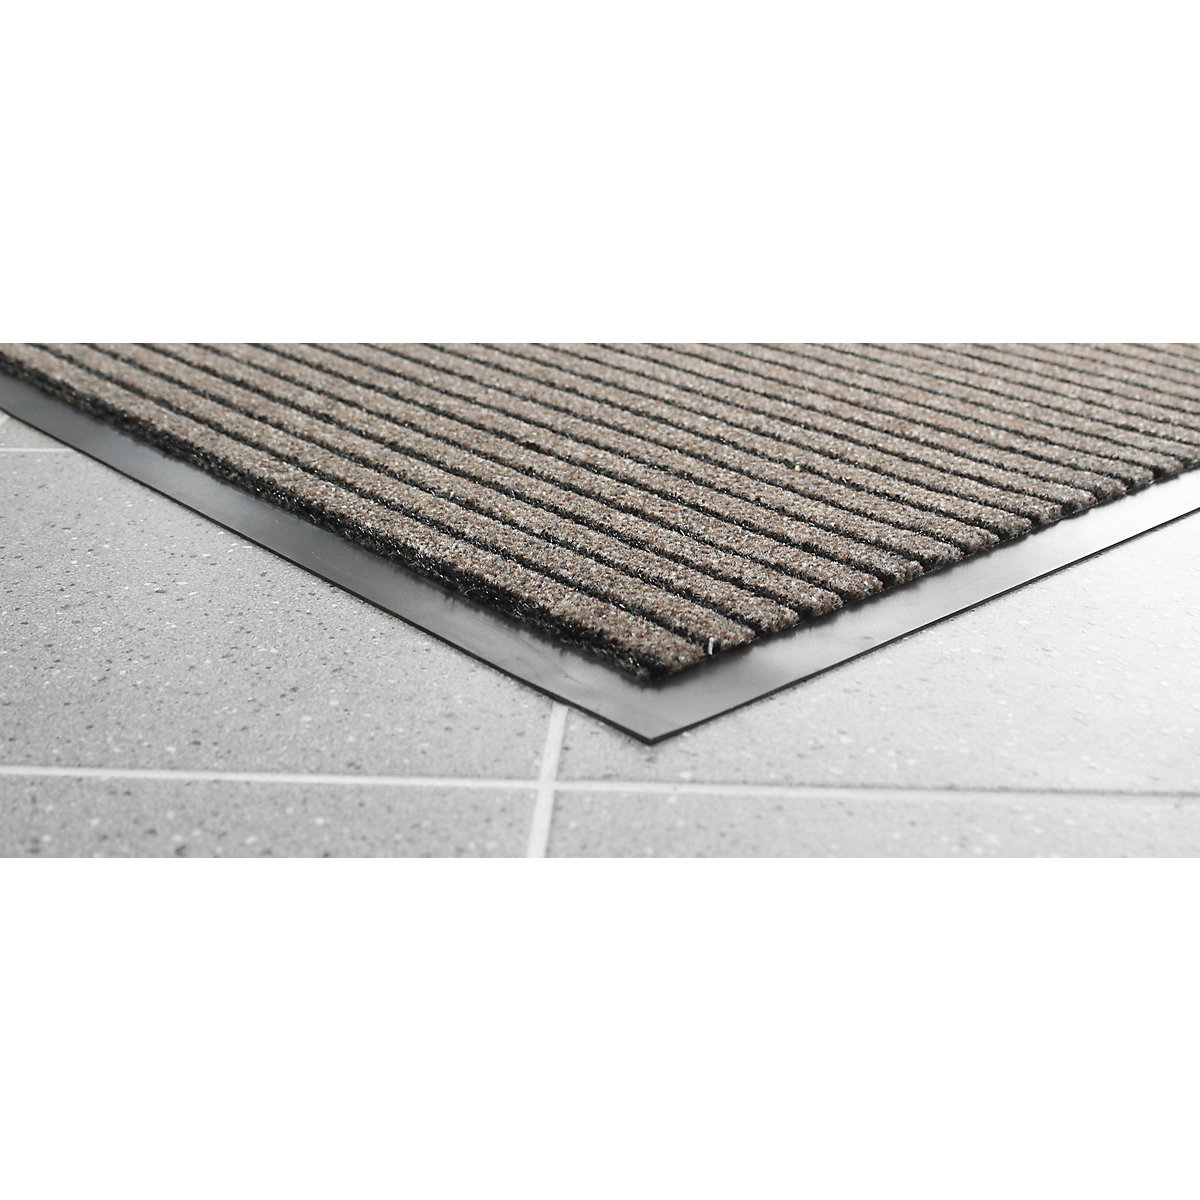 Brush entrance matting, LxW 900 x 600 mm, pack of 2, brown striped